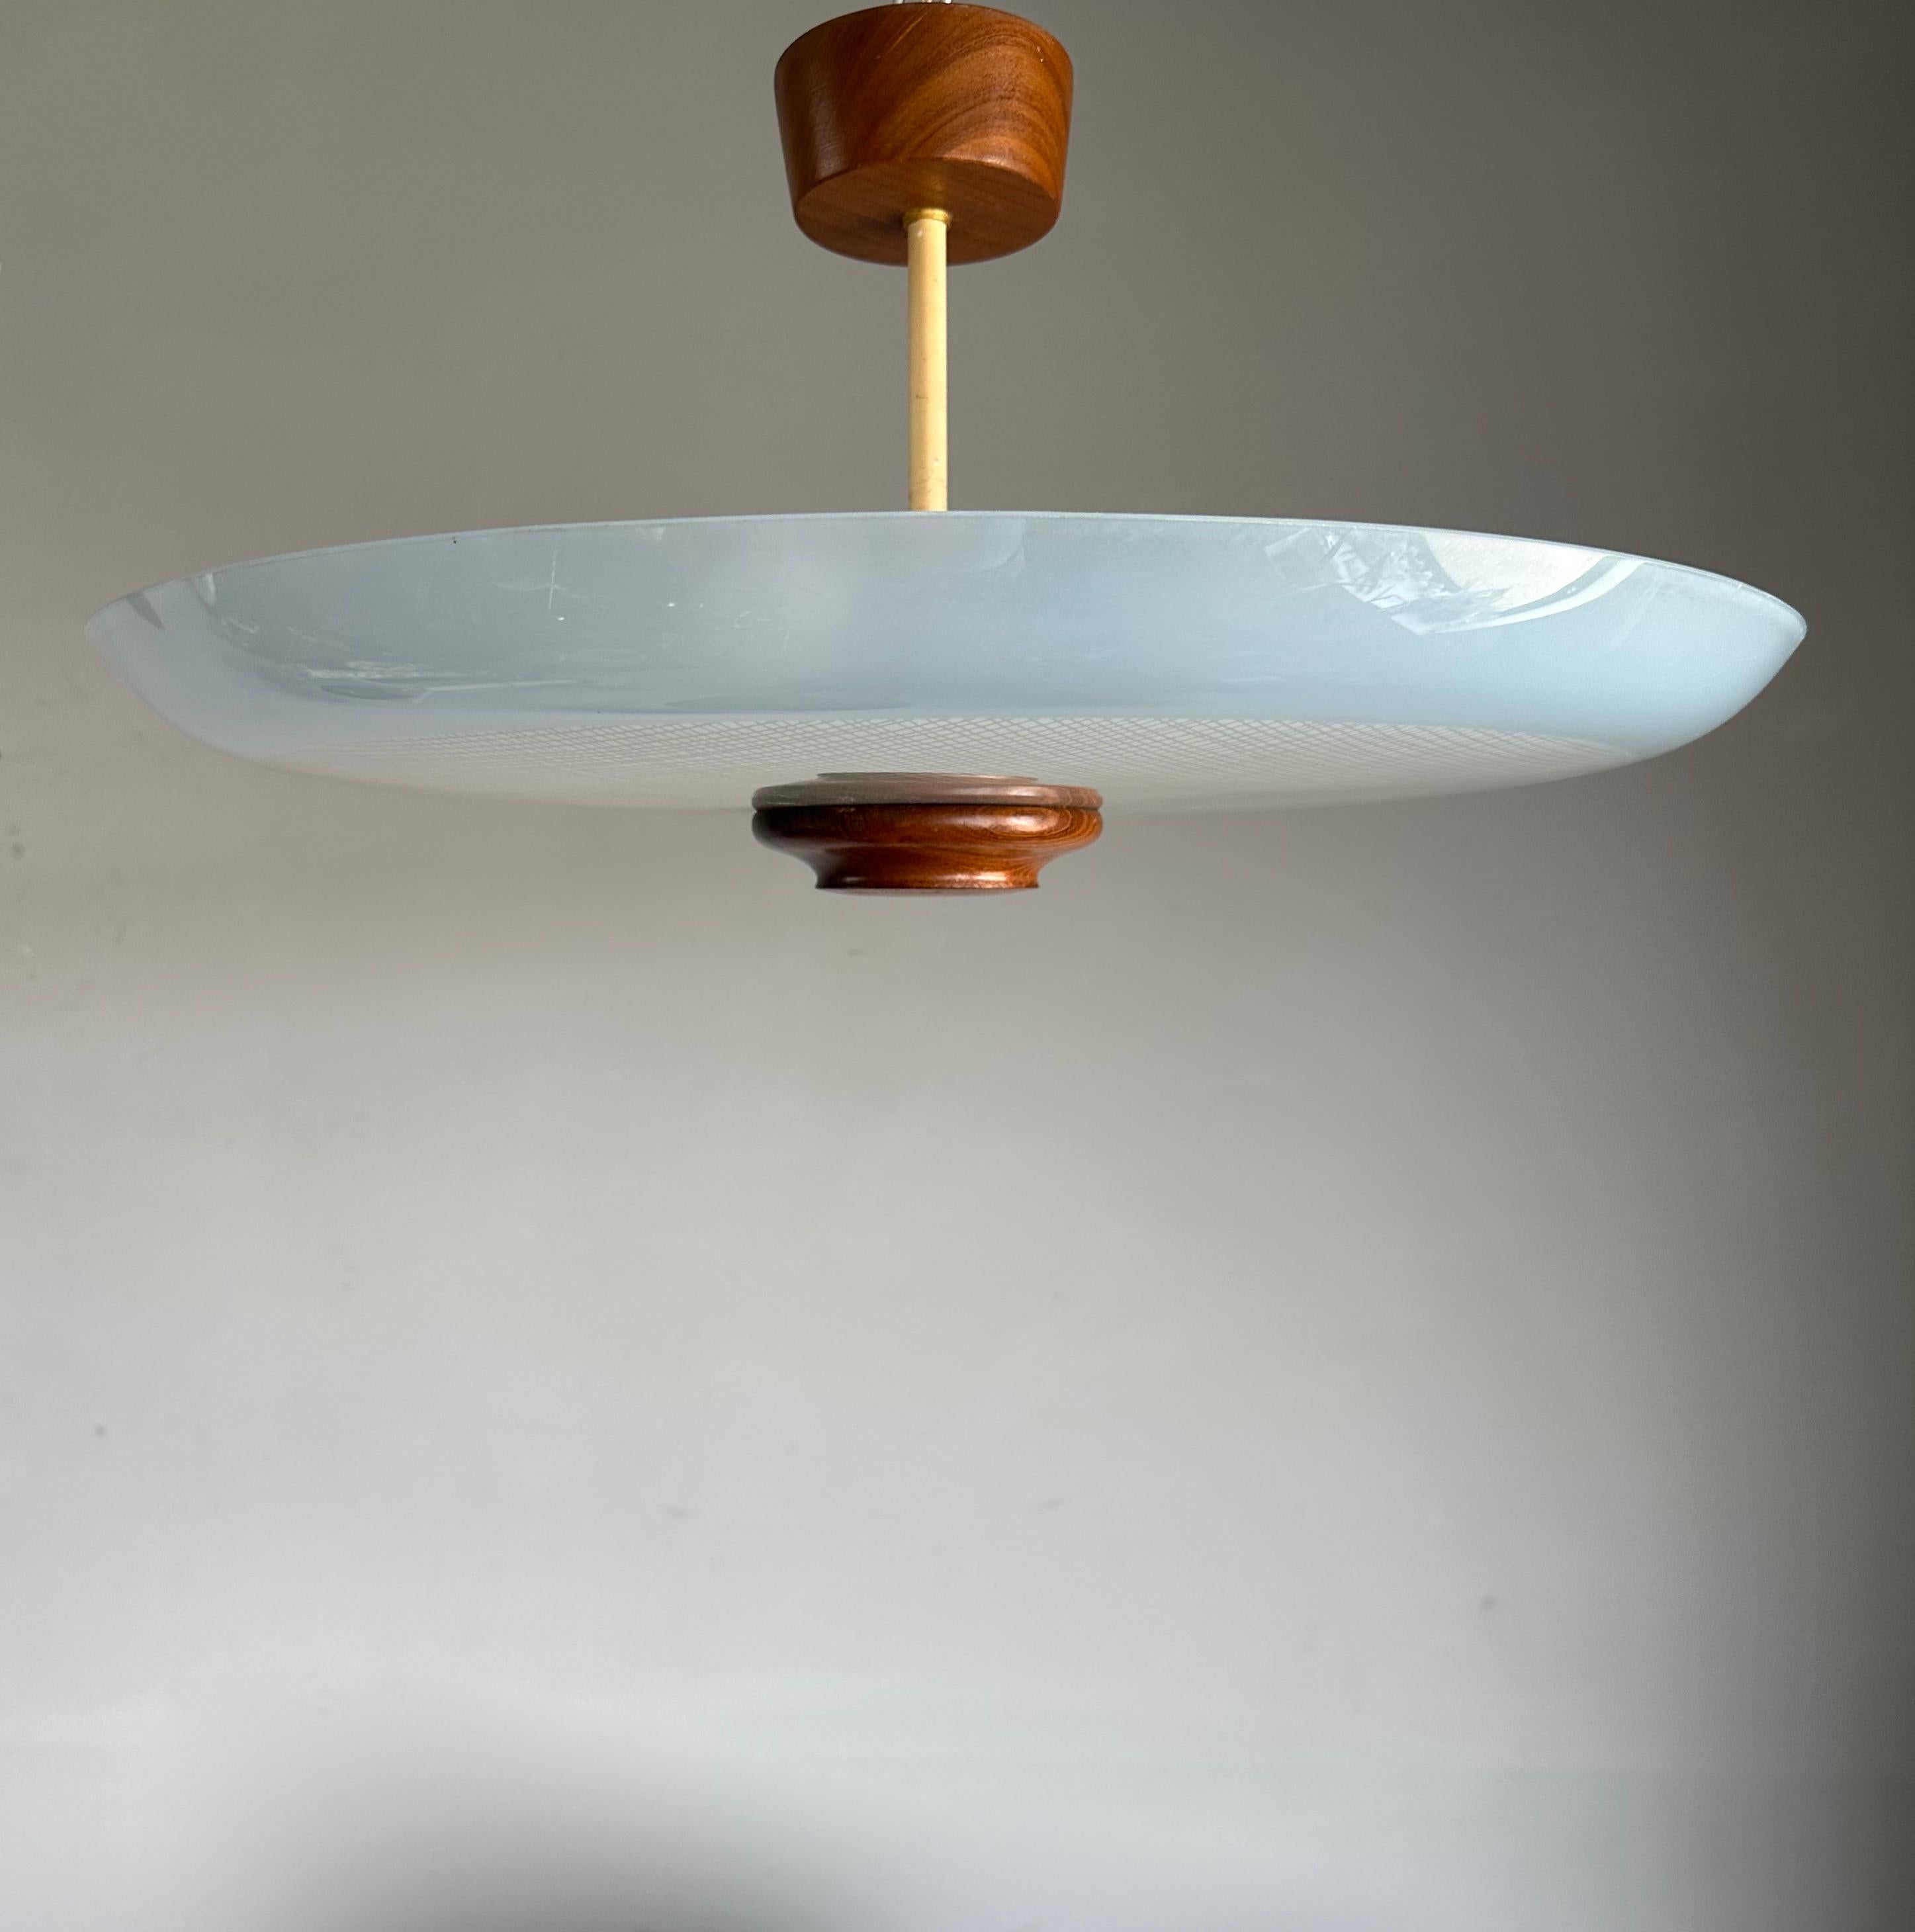 Great Mid-Century Modern ceiling light with teakwood finial & canopy and 'woven' stripes pattern in the glass shade.

This vintage, three-light flush mount has a beautiful look and feel and you will hardly ever find a light fixture from the